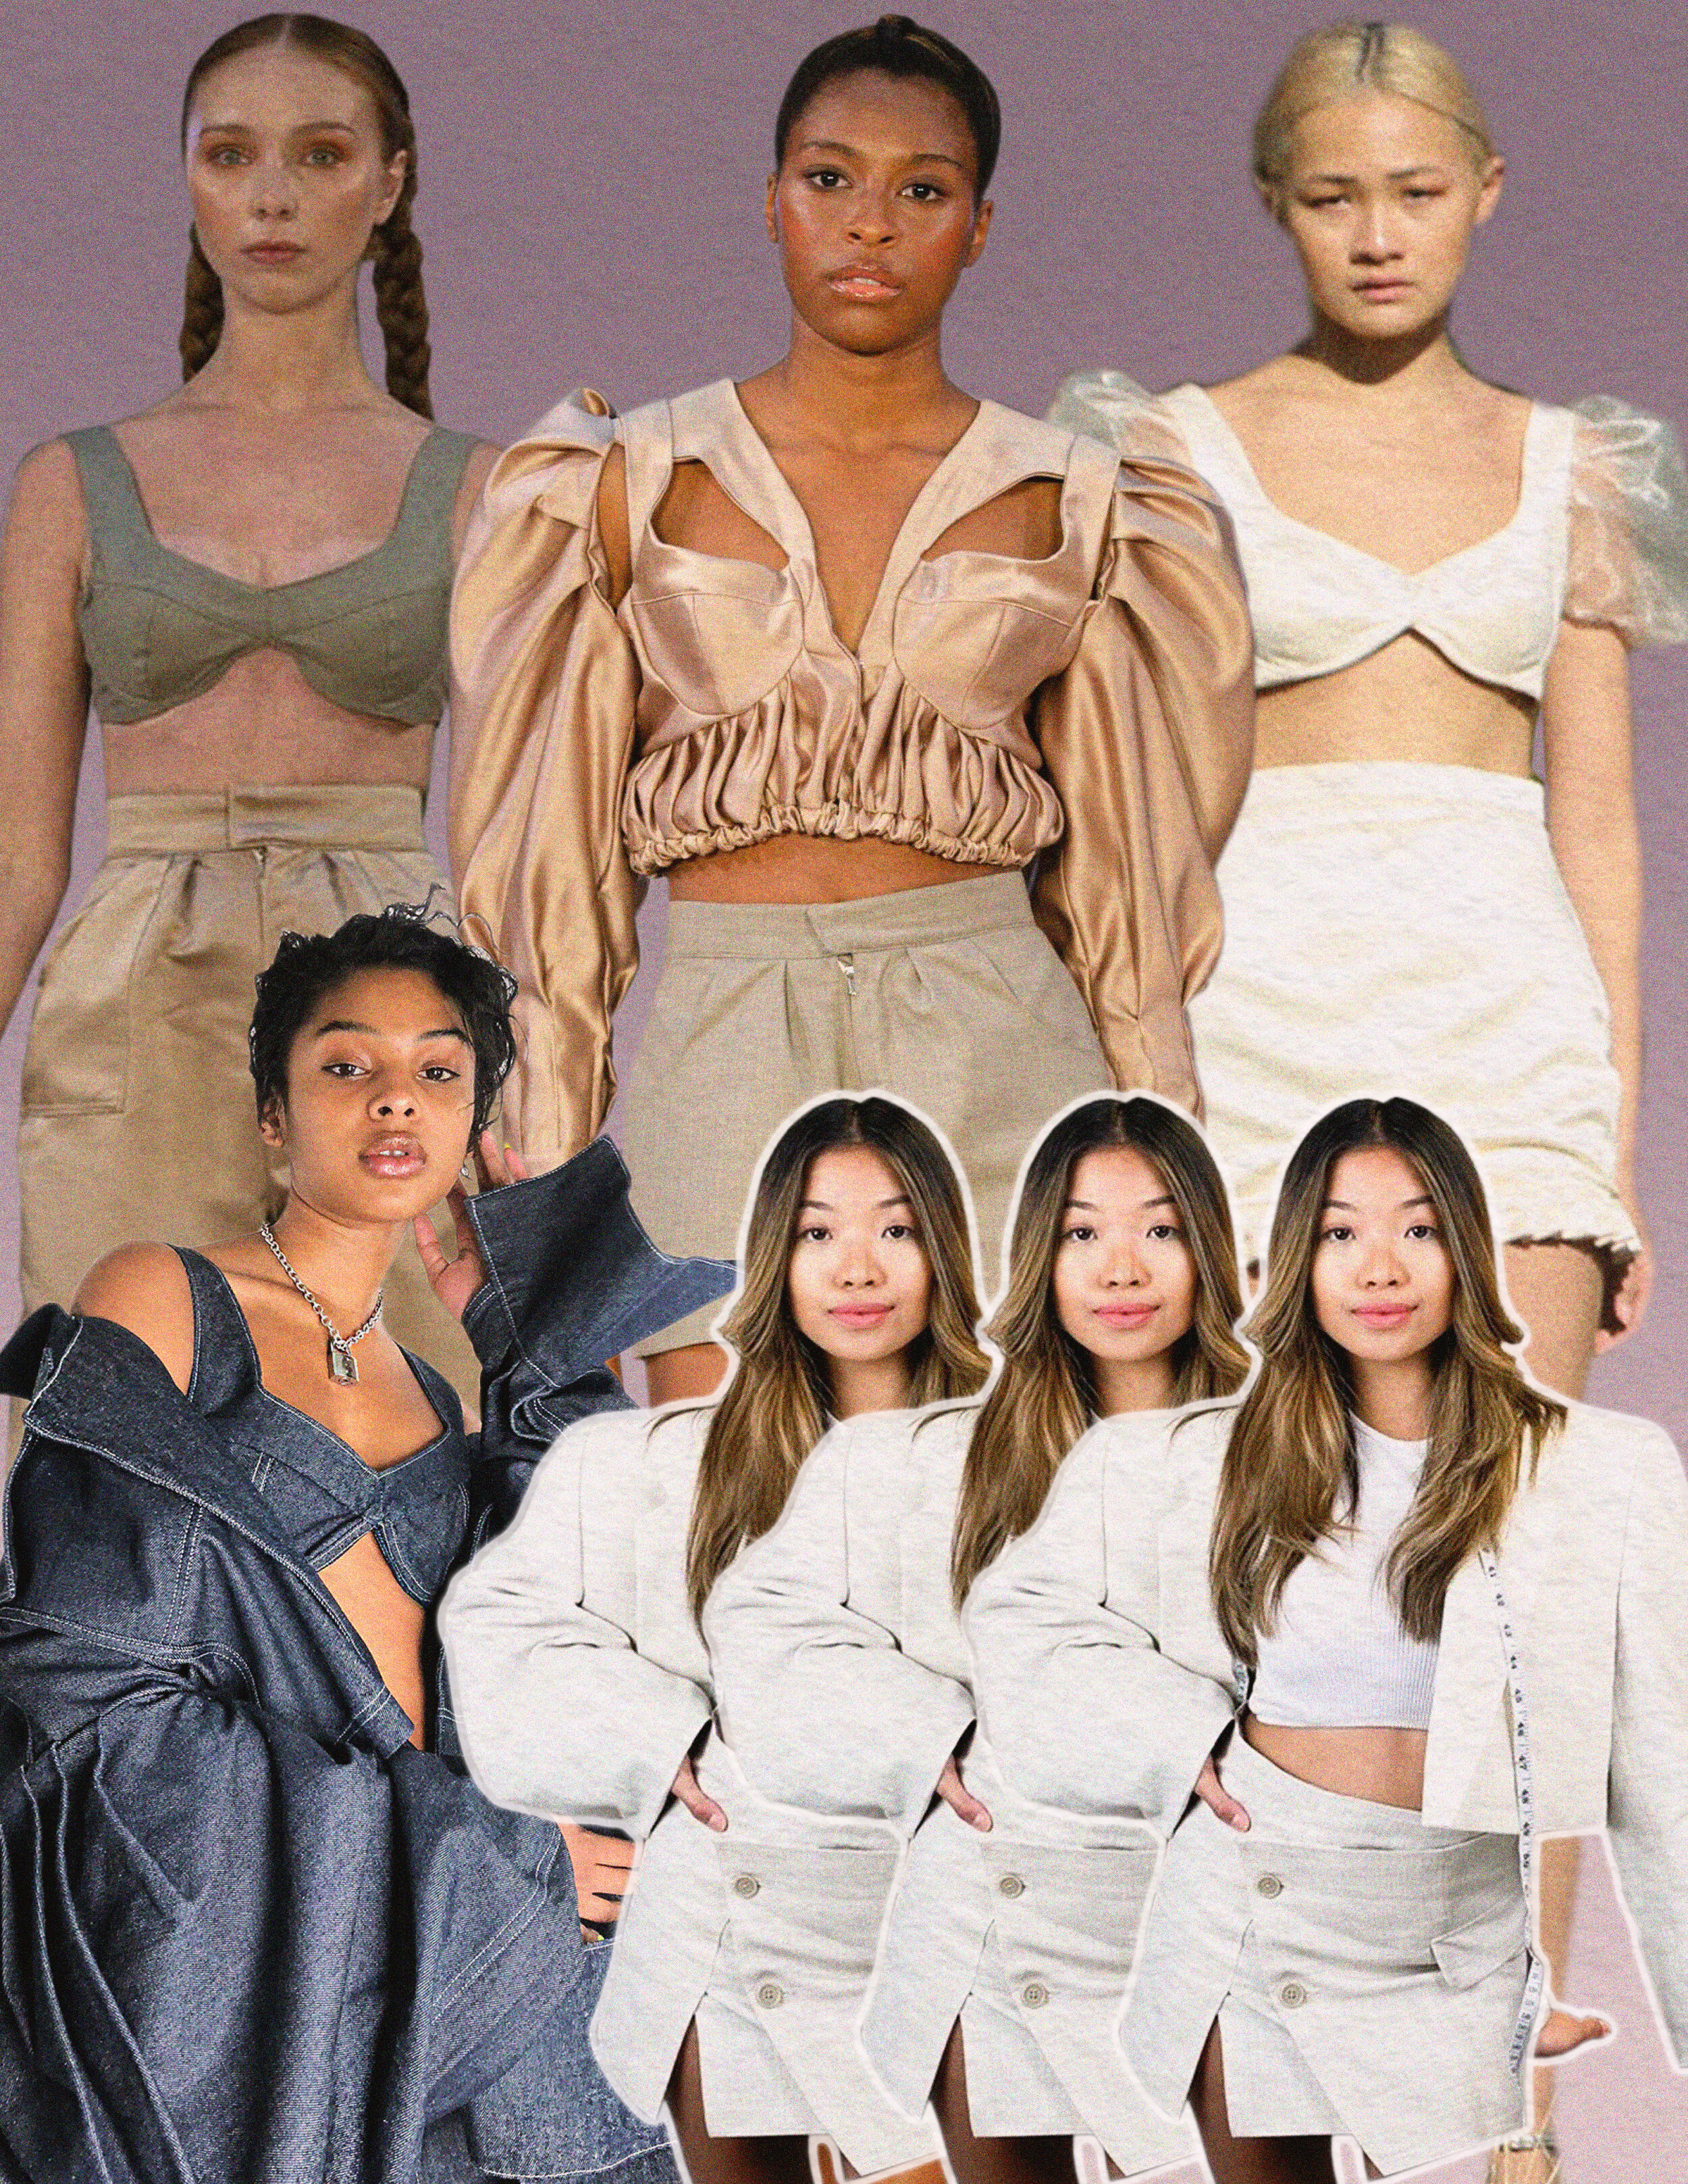 5 EMERGING ASIAN DESIGNERS YOU SHOULD HAVE ON YOUR RADAR - Culted